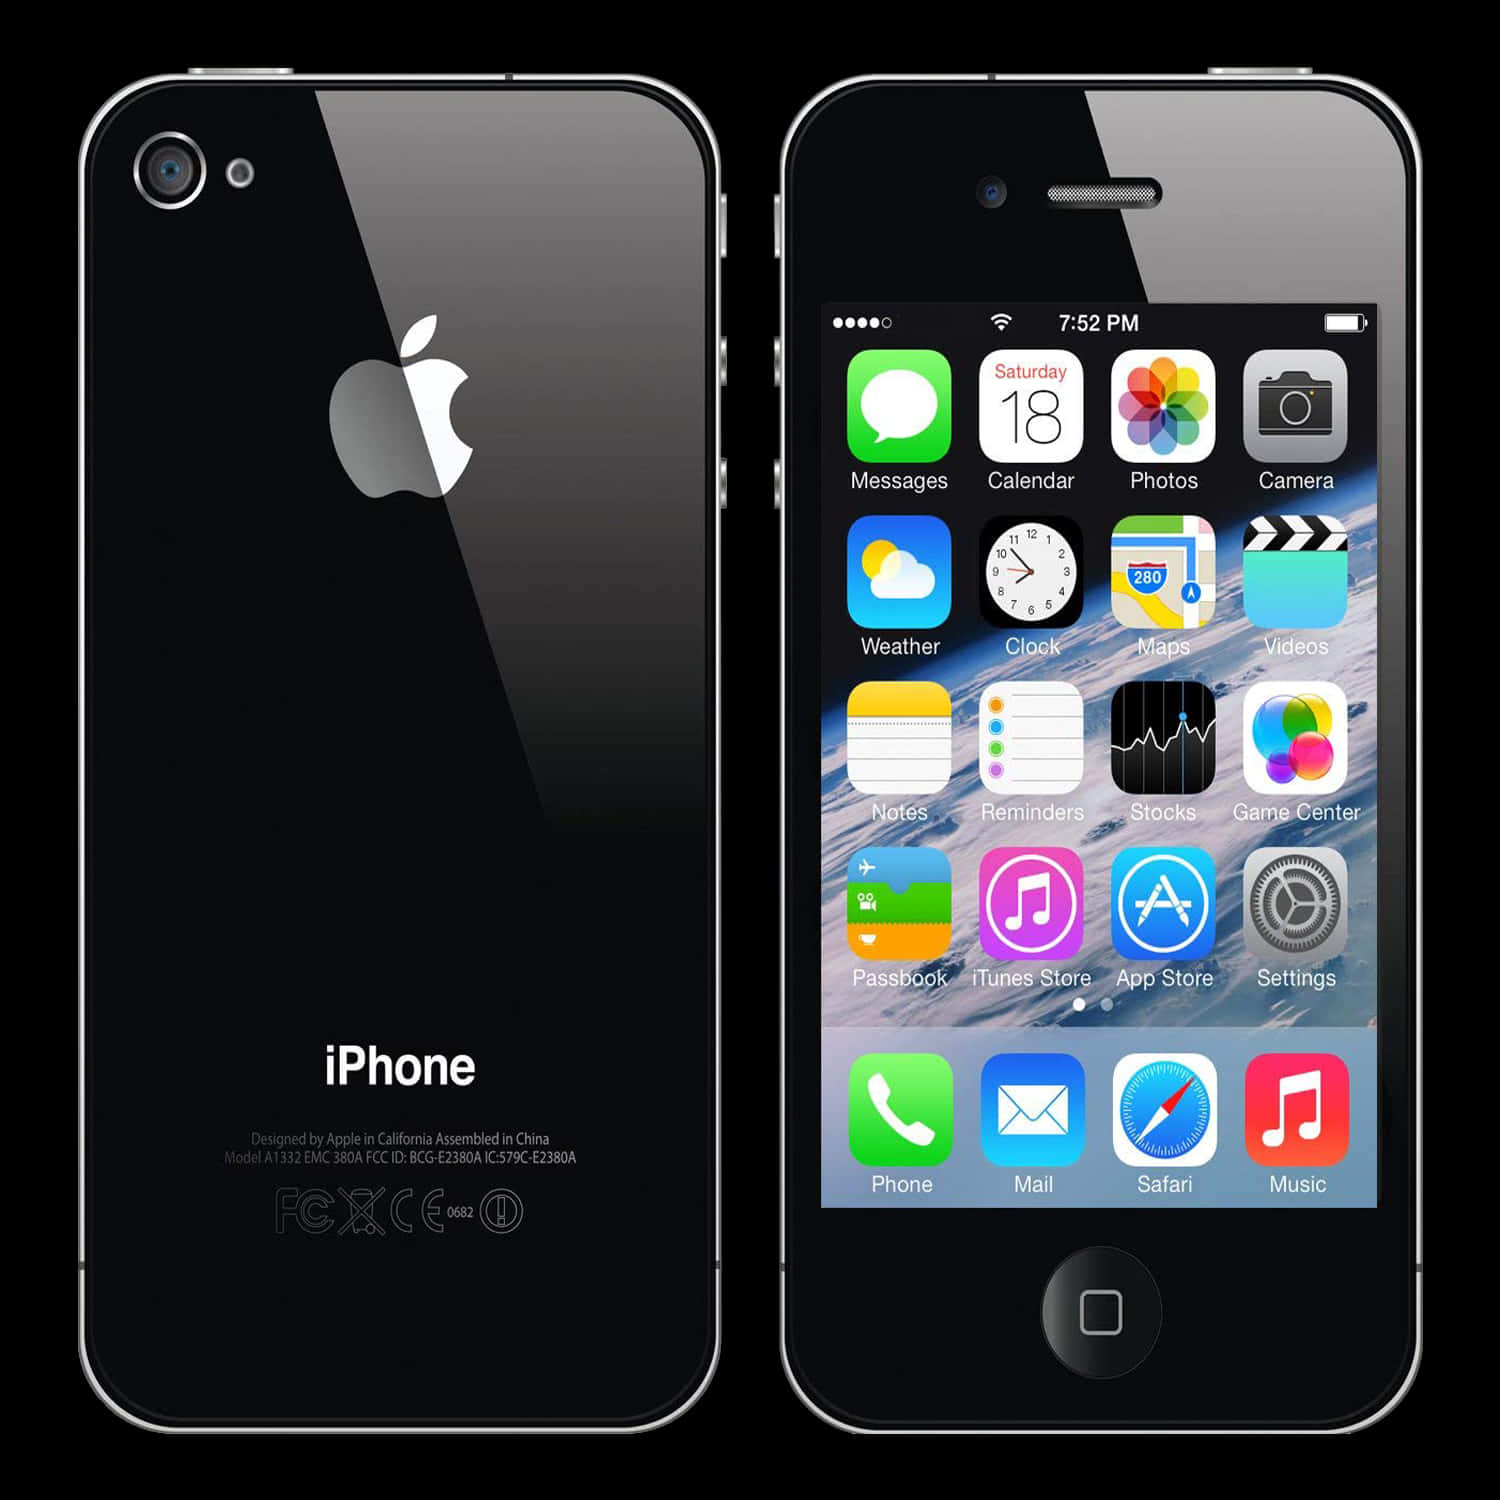 An Iphone 4s Is Shown